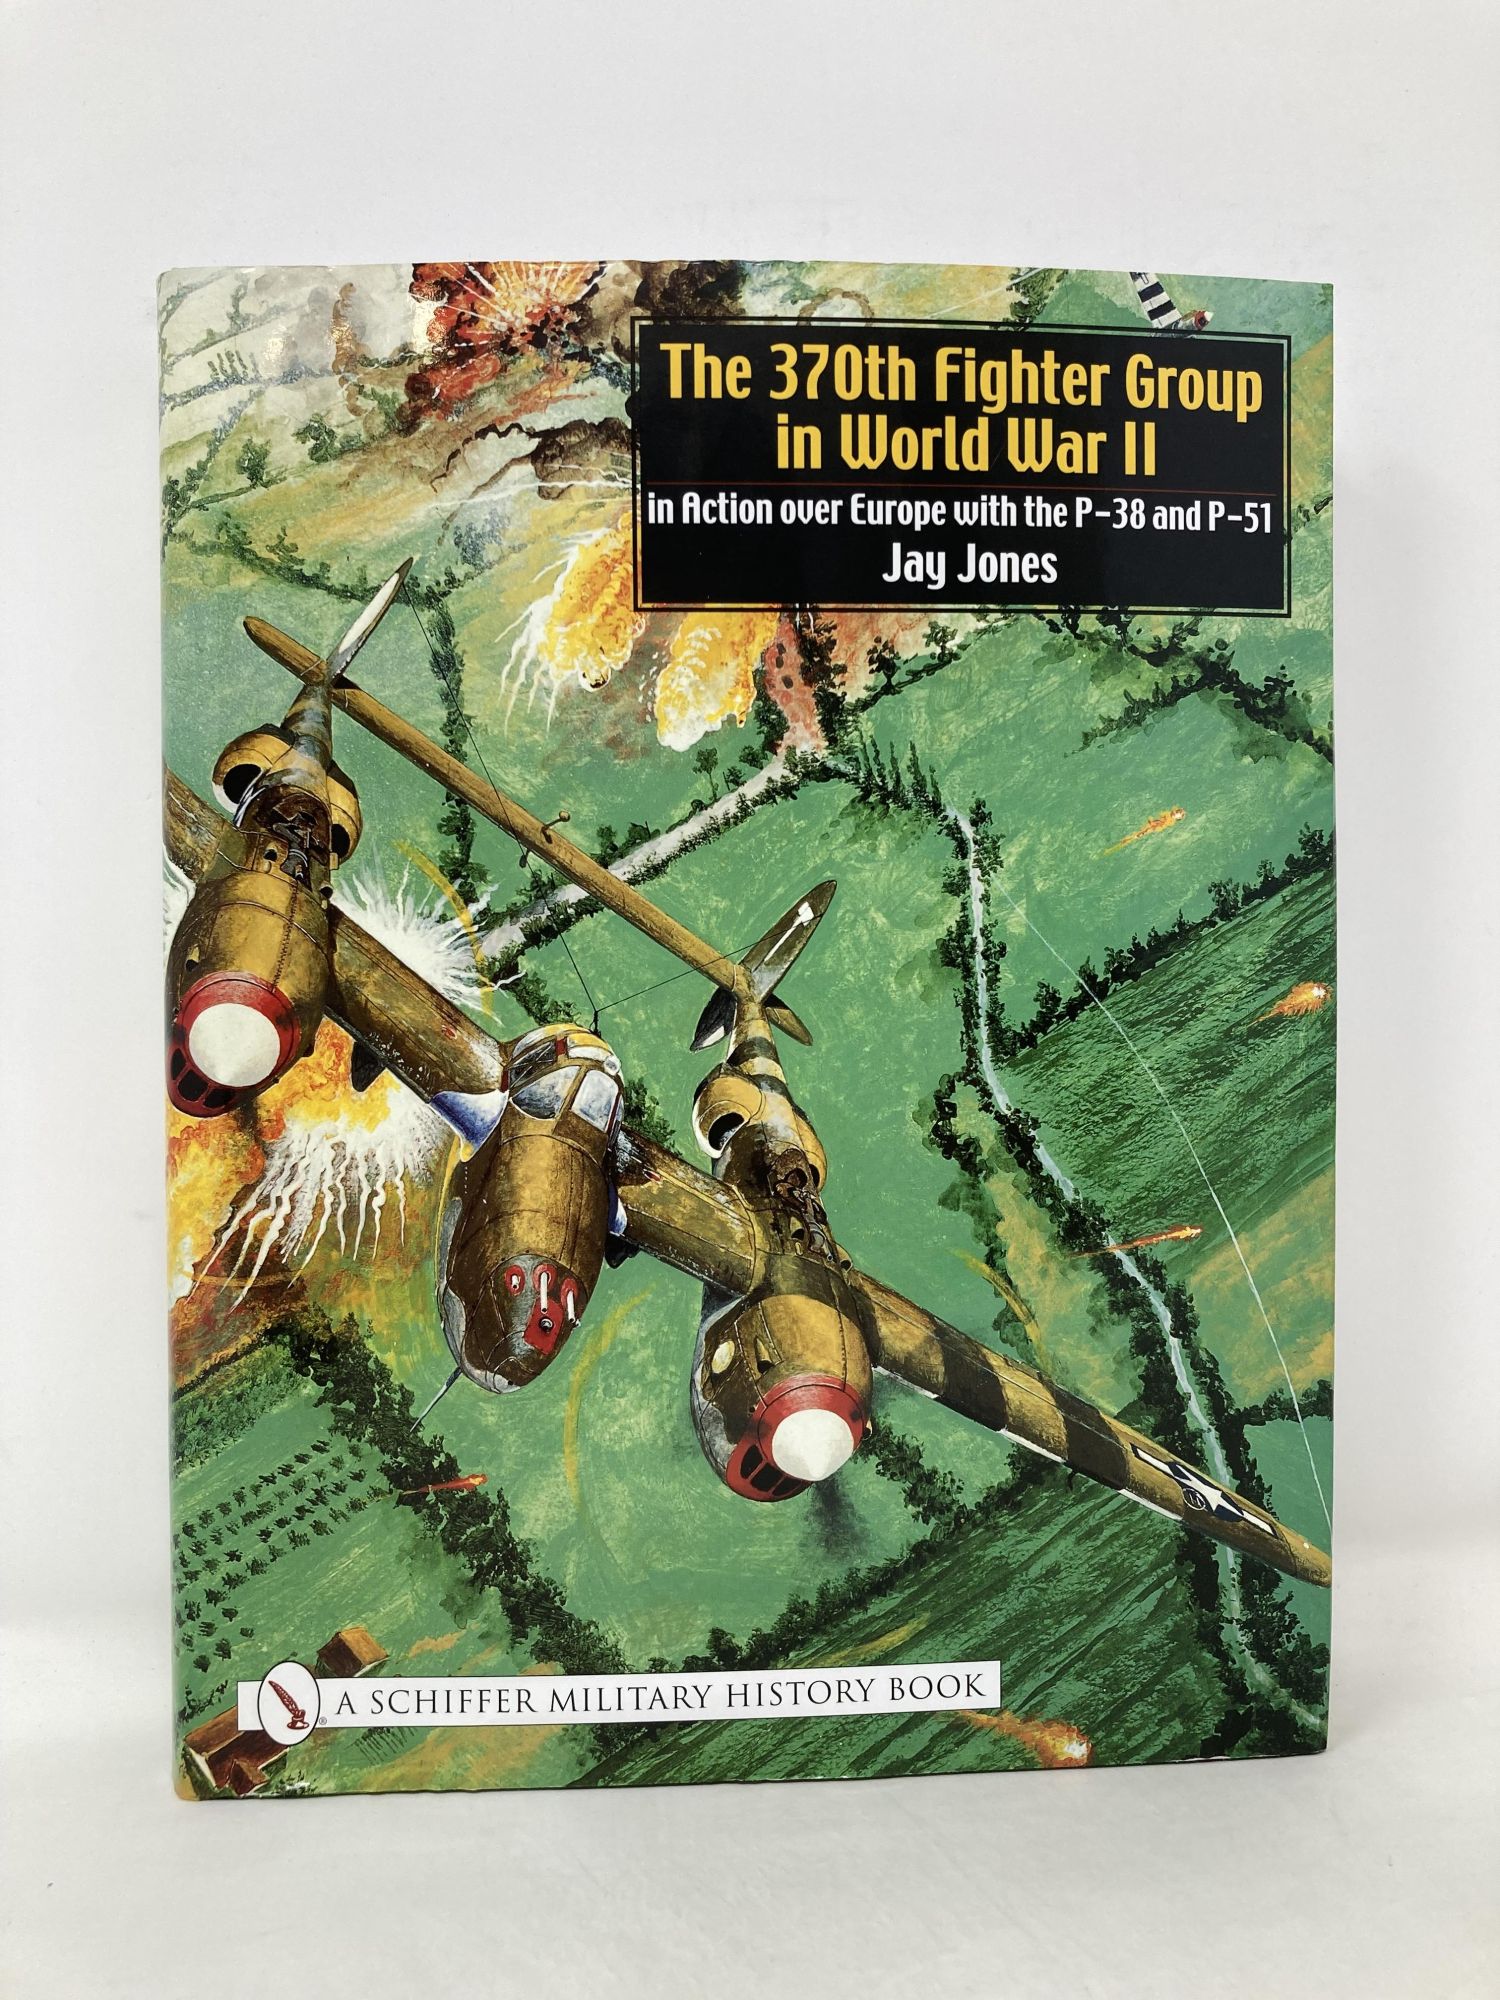 The 370th Fighter Group in World War II: In Action Over Europe 